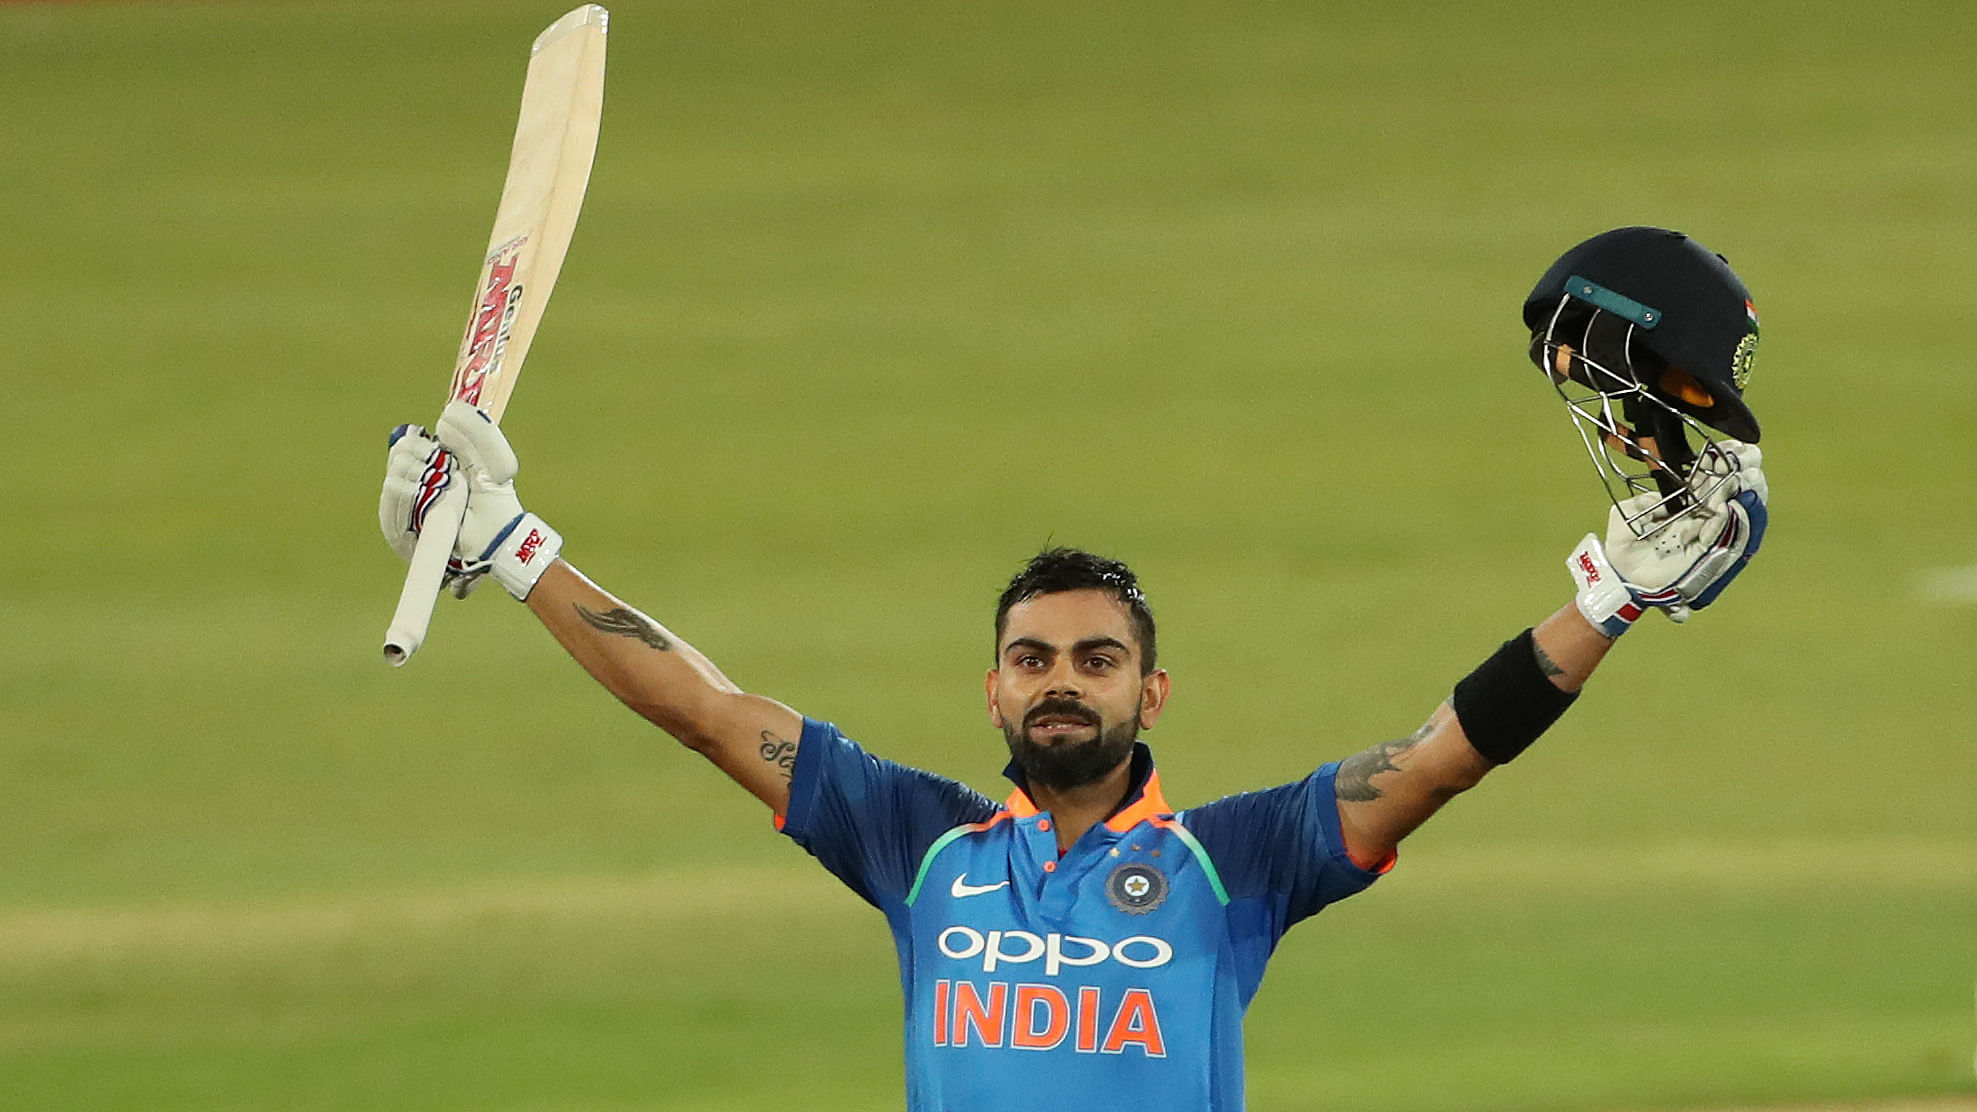 Virat Kohli scores his 35th ODI century during India’s sixth and final one-dayer against South Africa on 16 February.